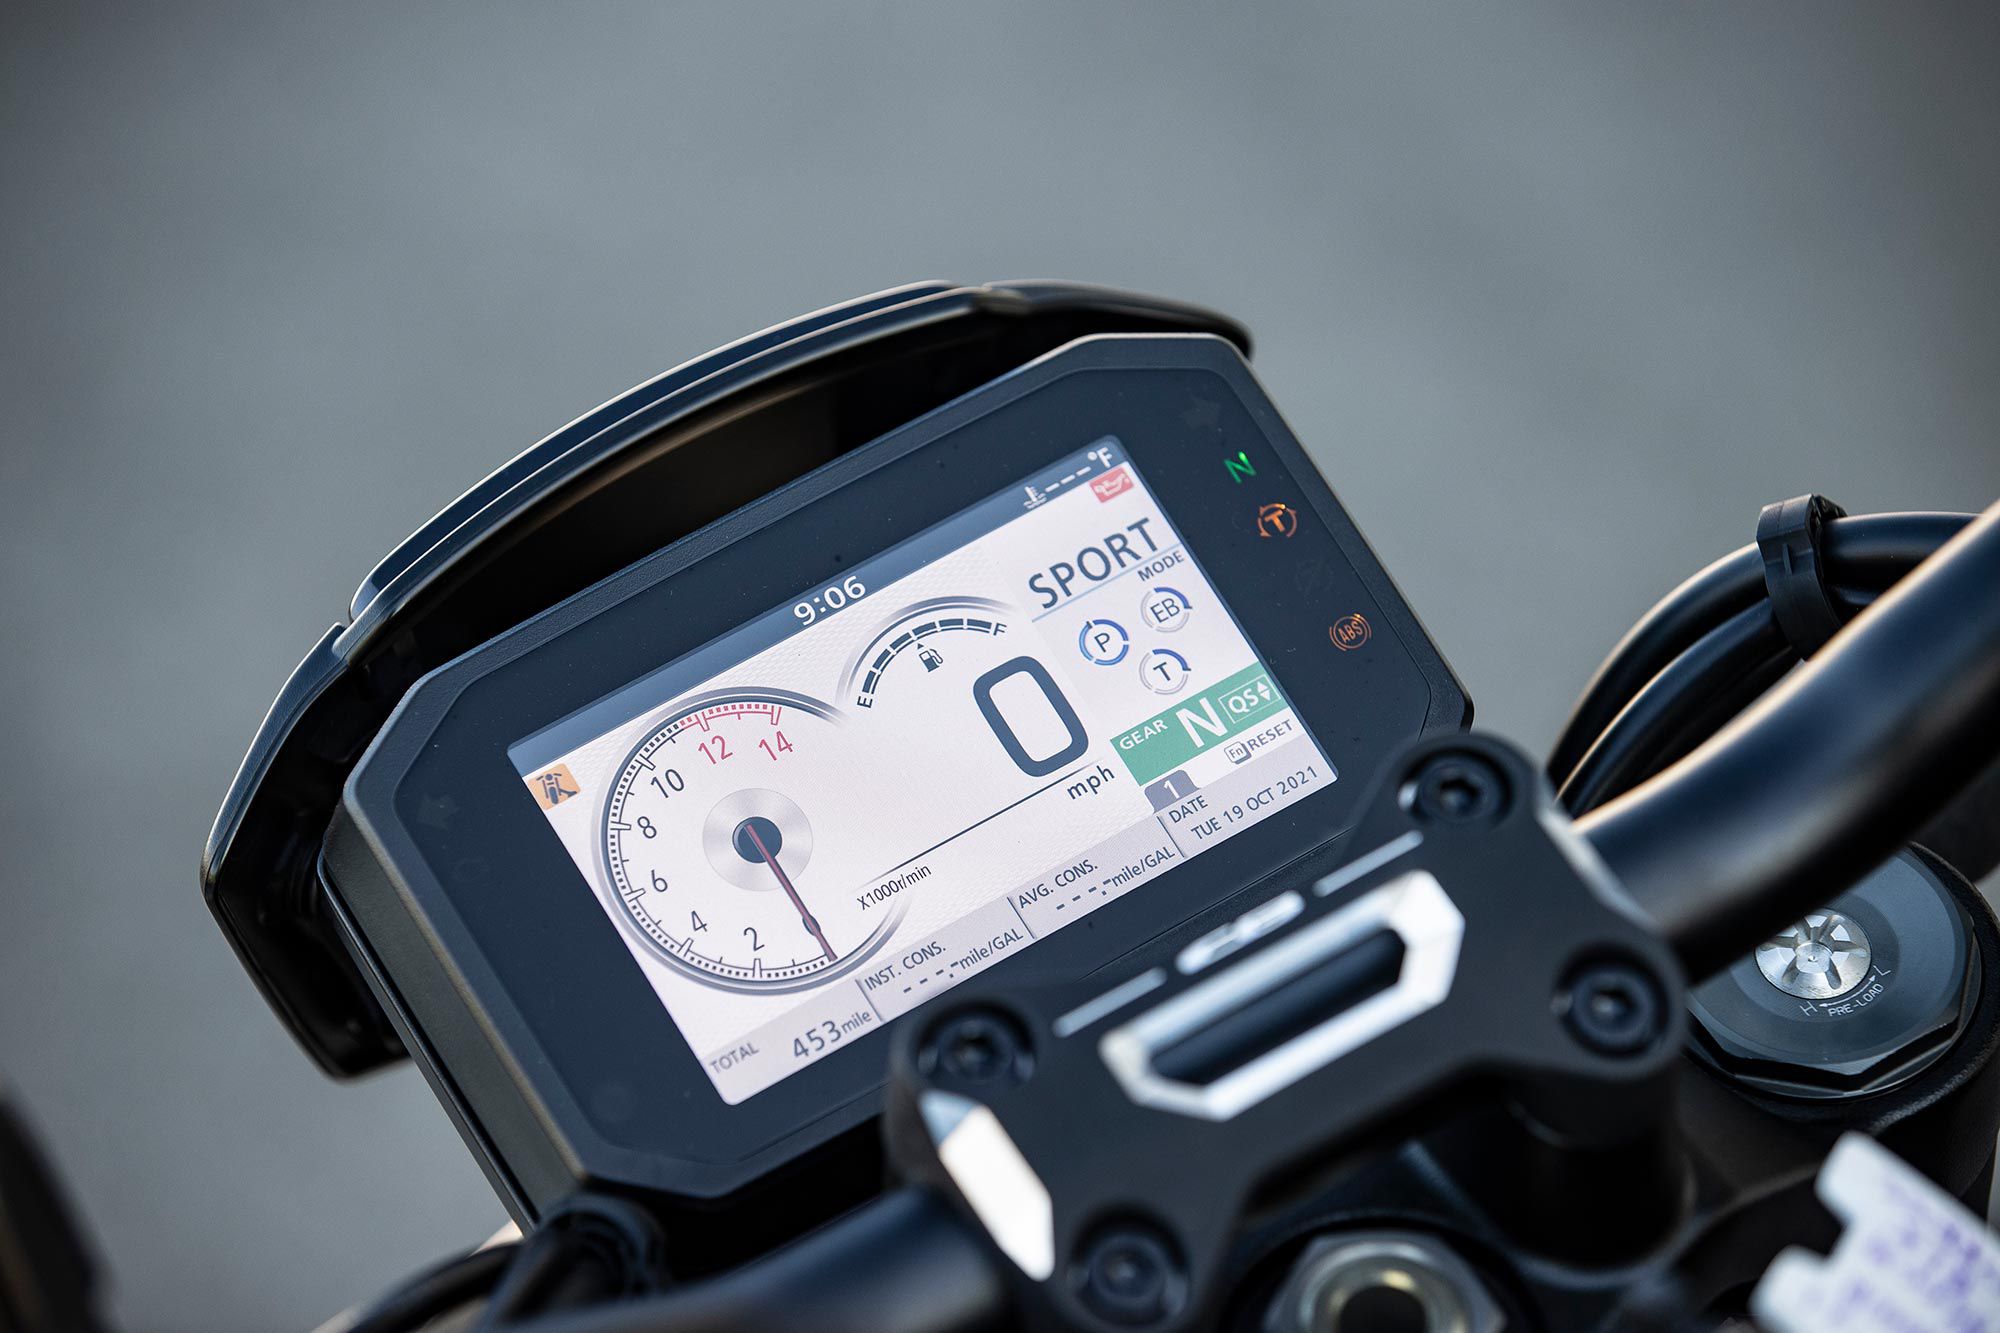 New to the CB1000R is a 5-inch TFT display, which replaces the clunky LCD display of the outgoing model.